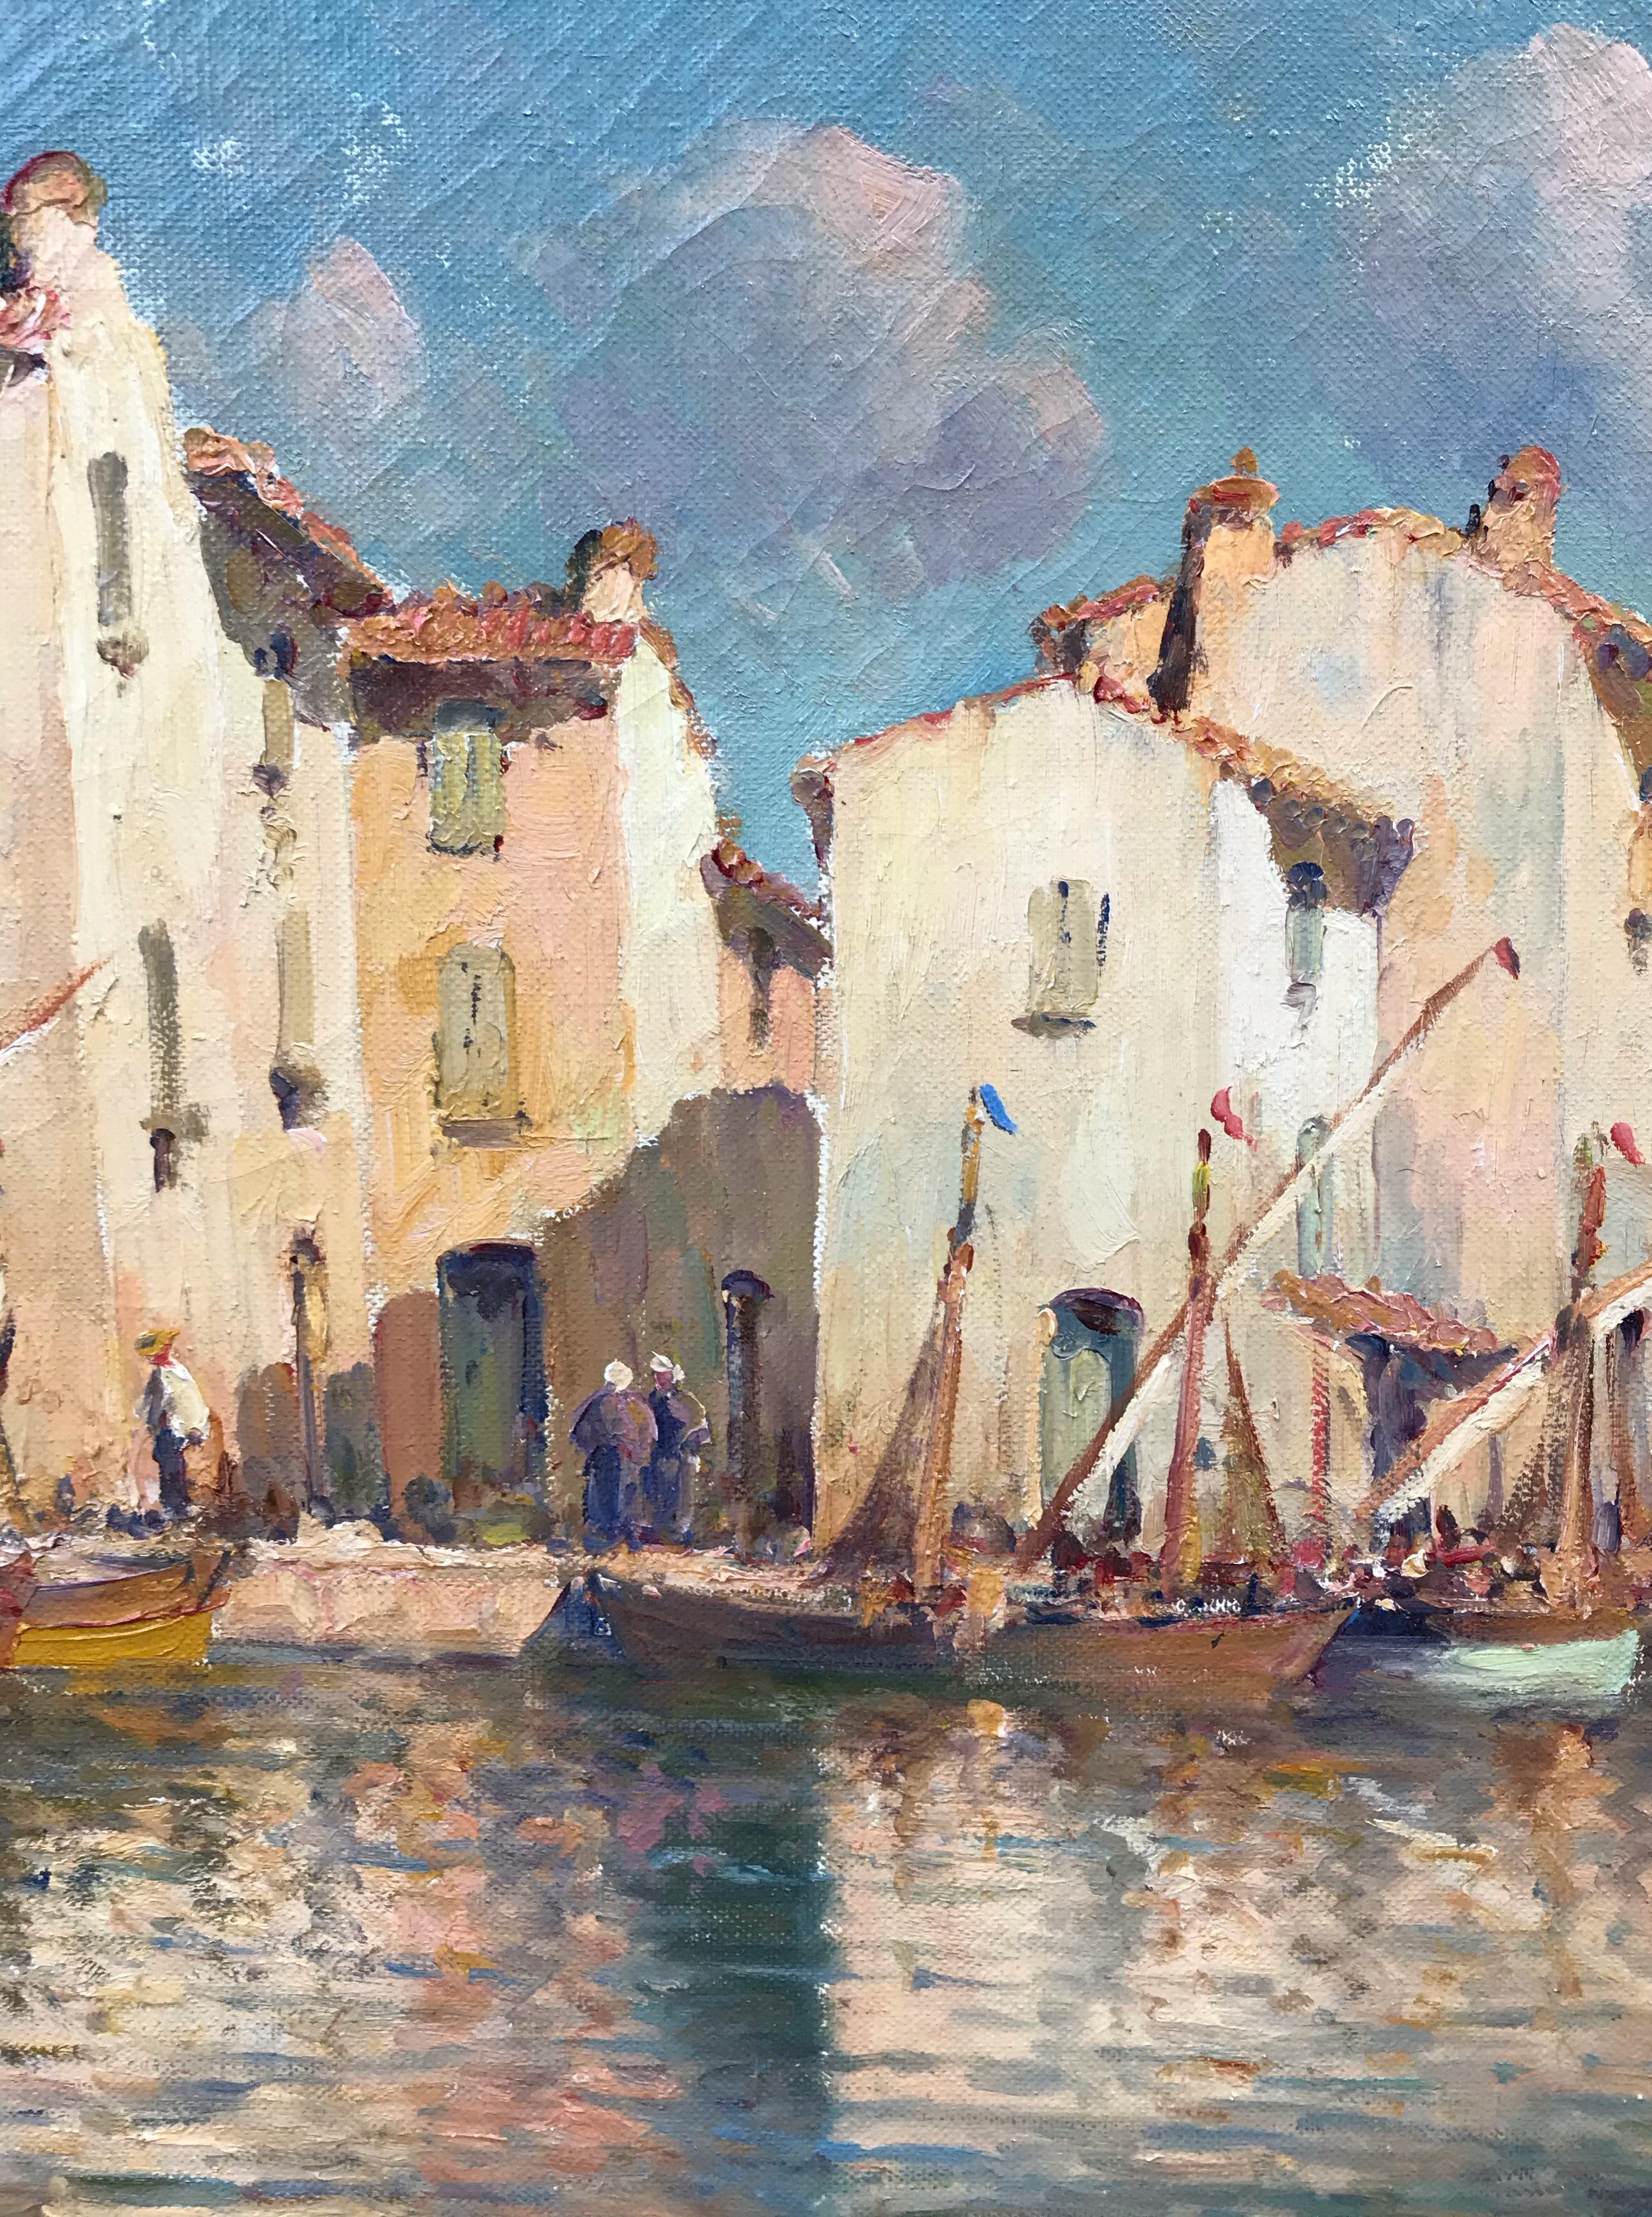 Vincent MANAGO (1880-1936) - Les Martigues French Riviera - Post-Impressionist Painting by Vincent Manago